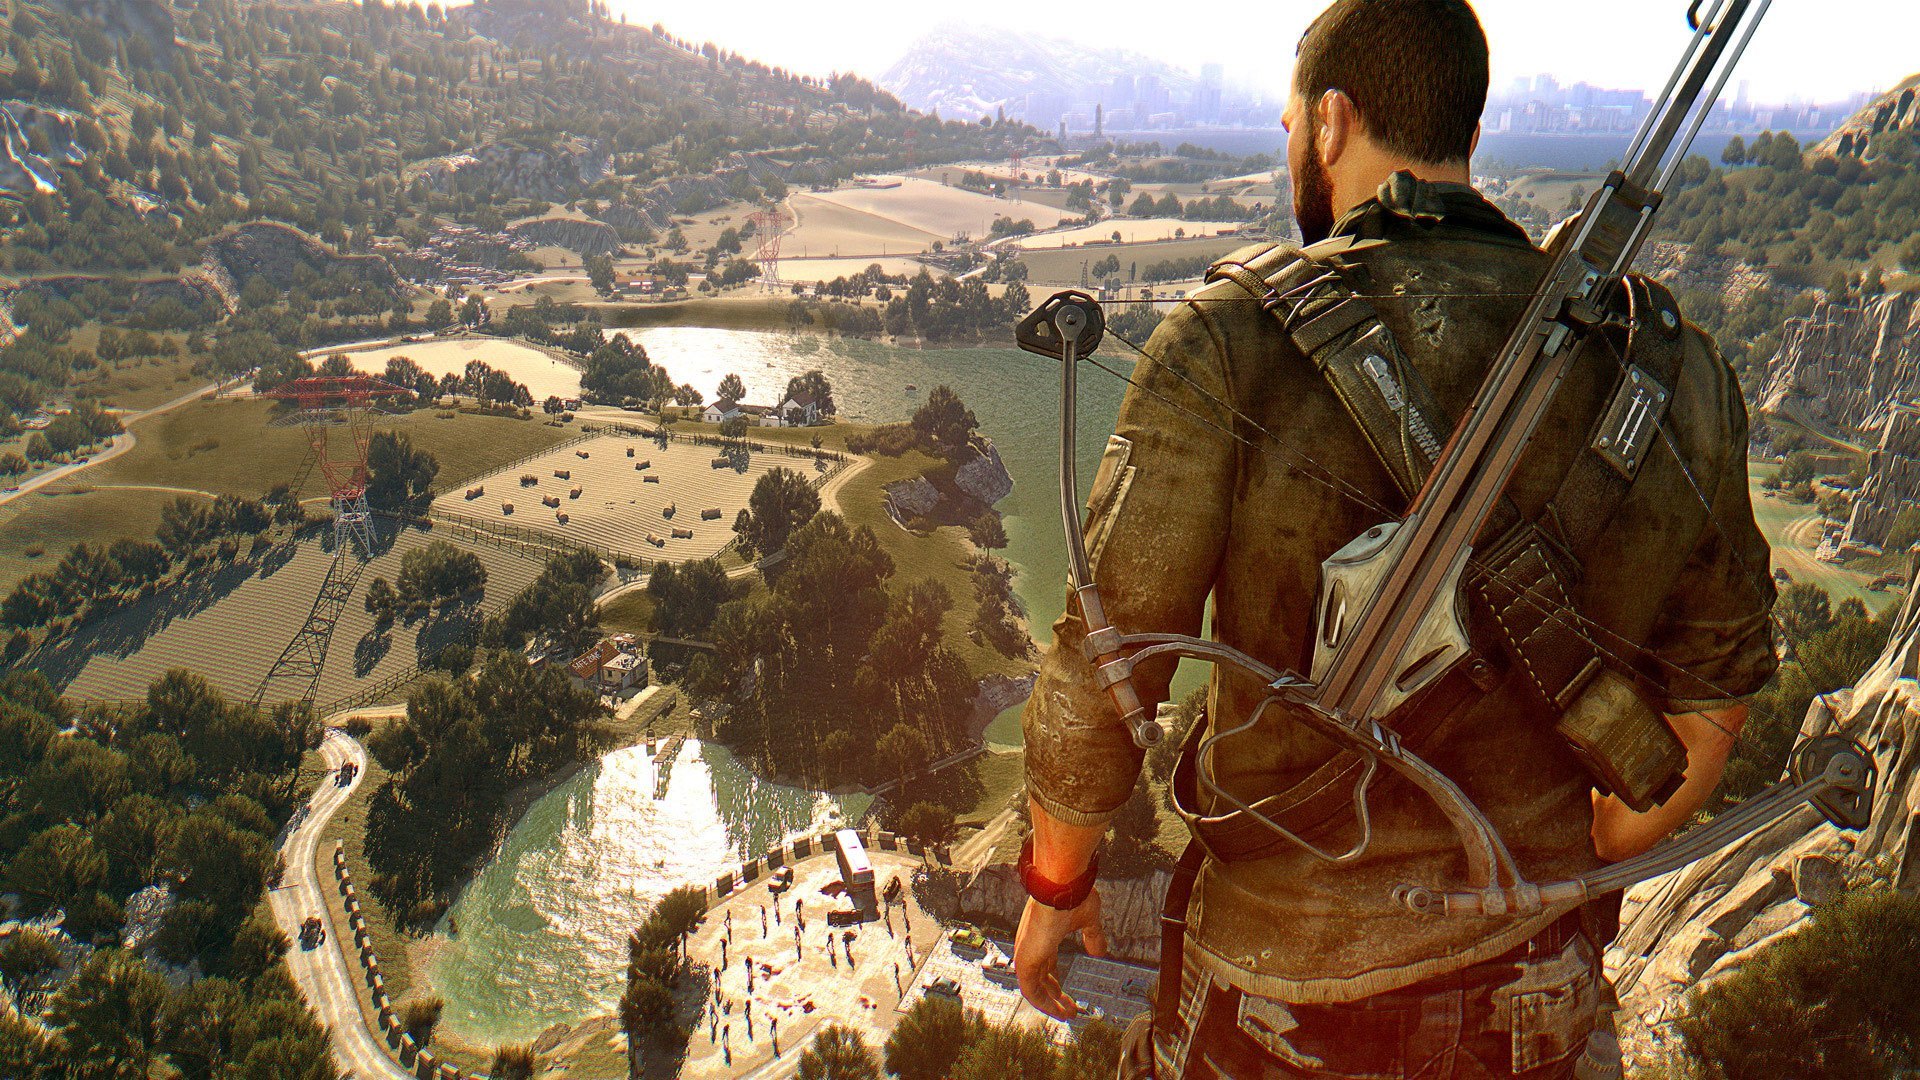 Media asset in full size related to 3dfxzone.it news item entitled as follows: Story trailer e screenshots del DLC The Following del game Dying Light | Image Name: news23514_dying-light-the-following-screenshot_1.jpg